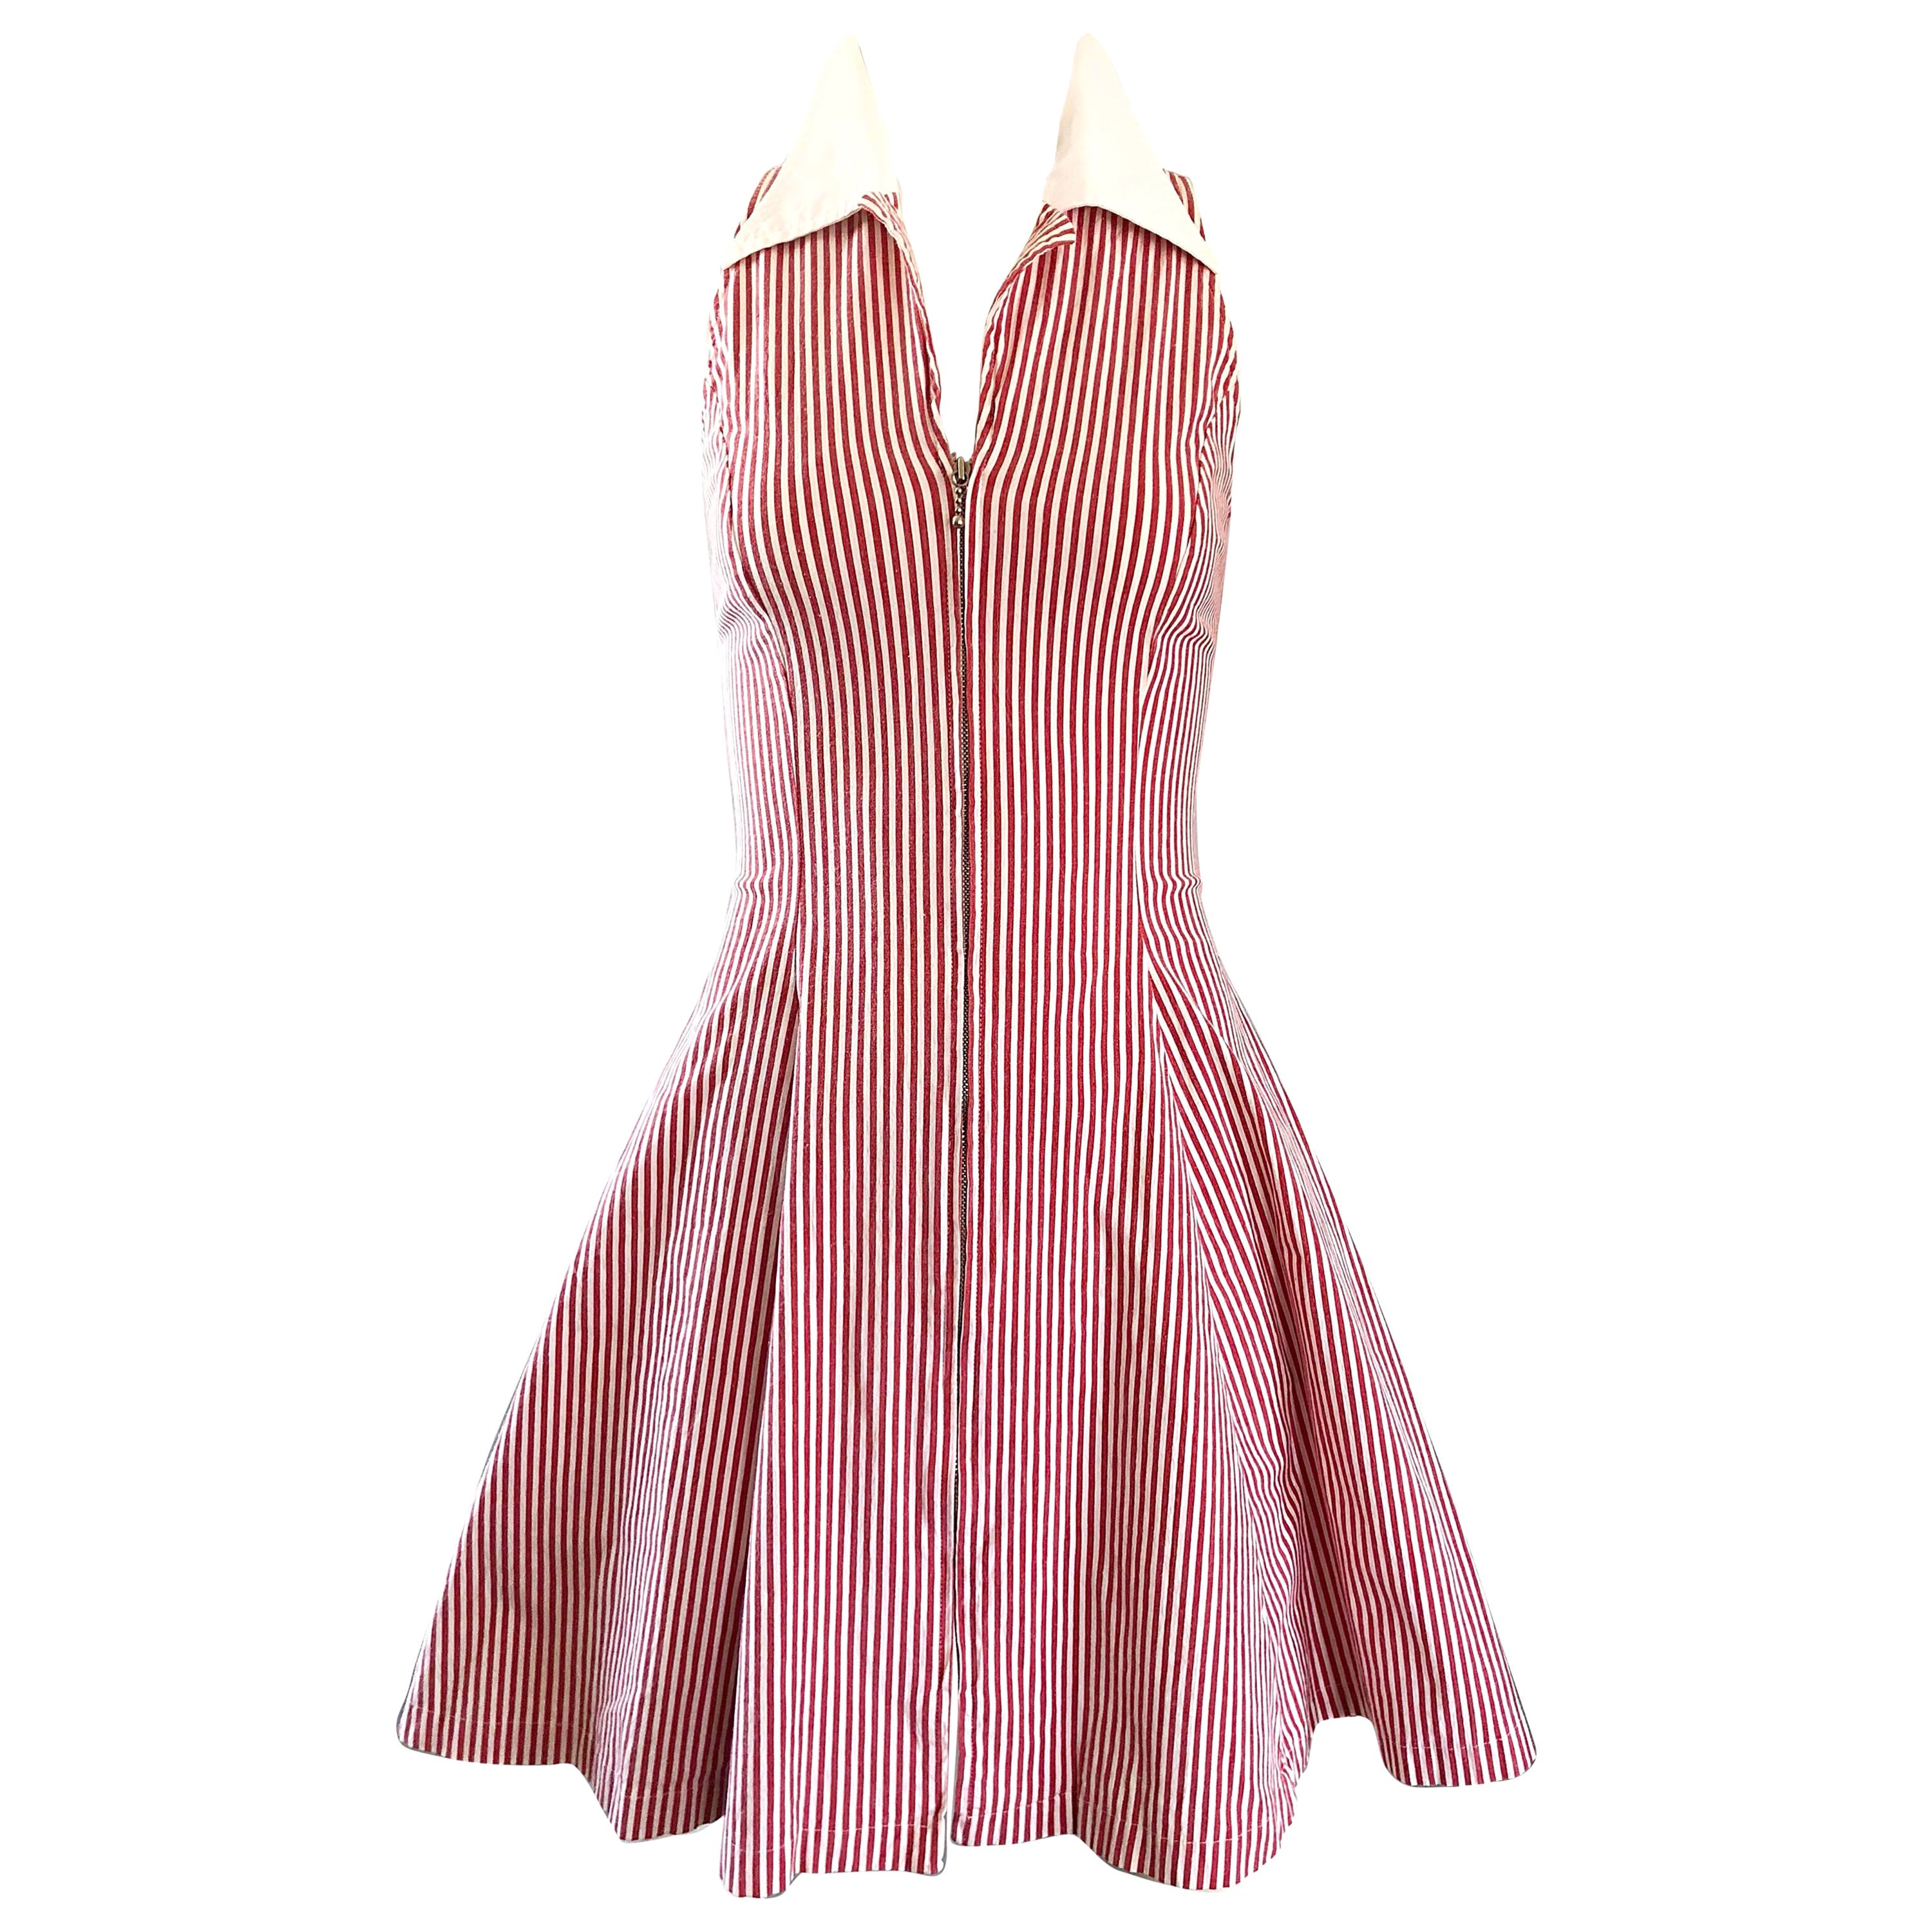 1980s Angelo Tarlazzi Vintage Red and White Seersucker Nautical Striped Dress 